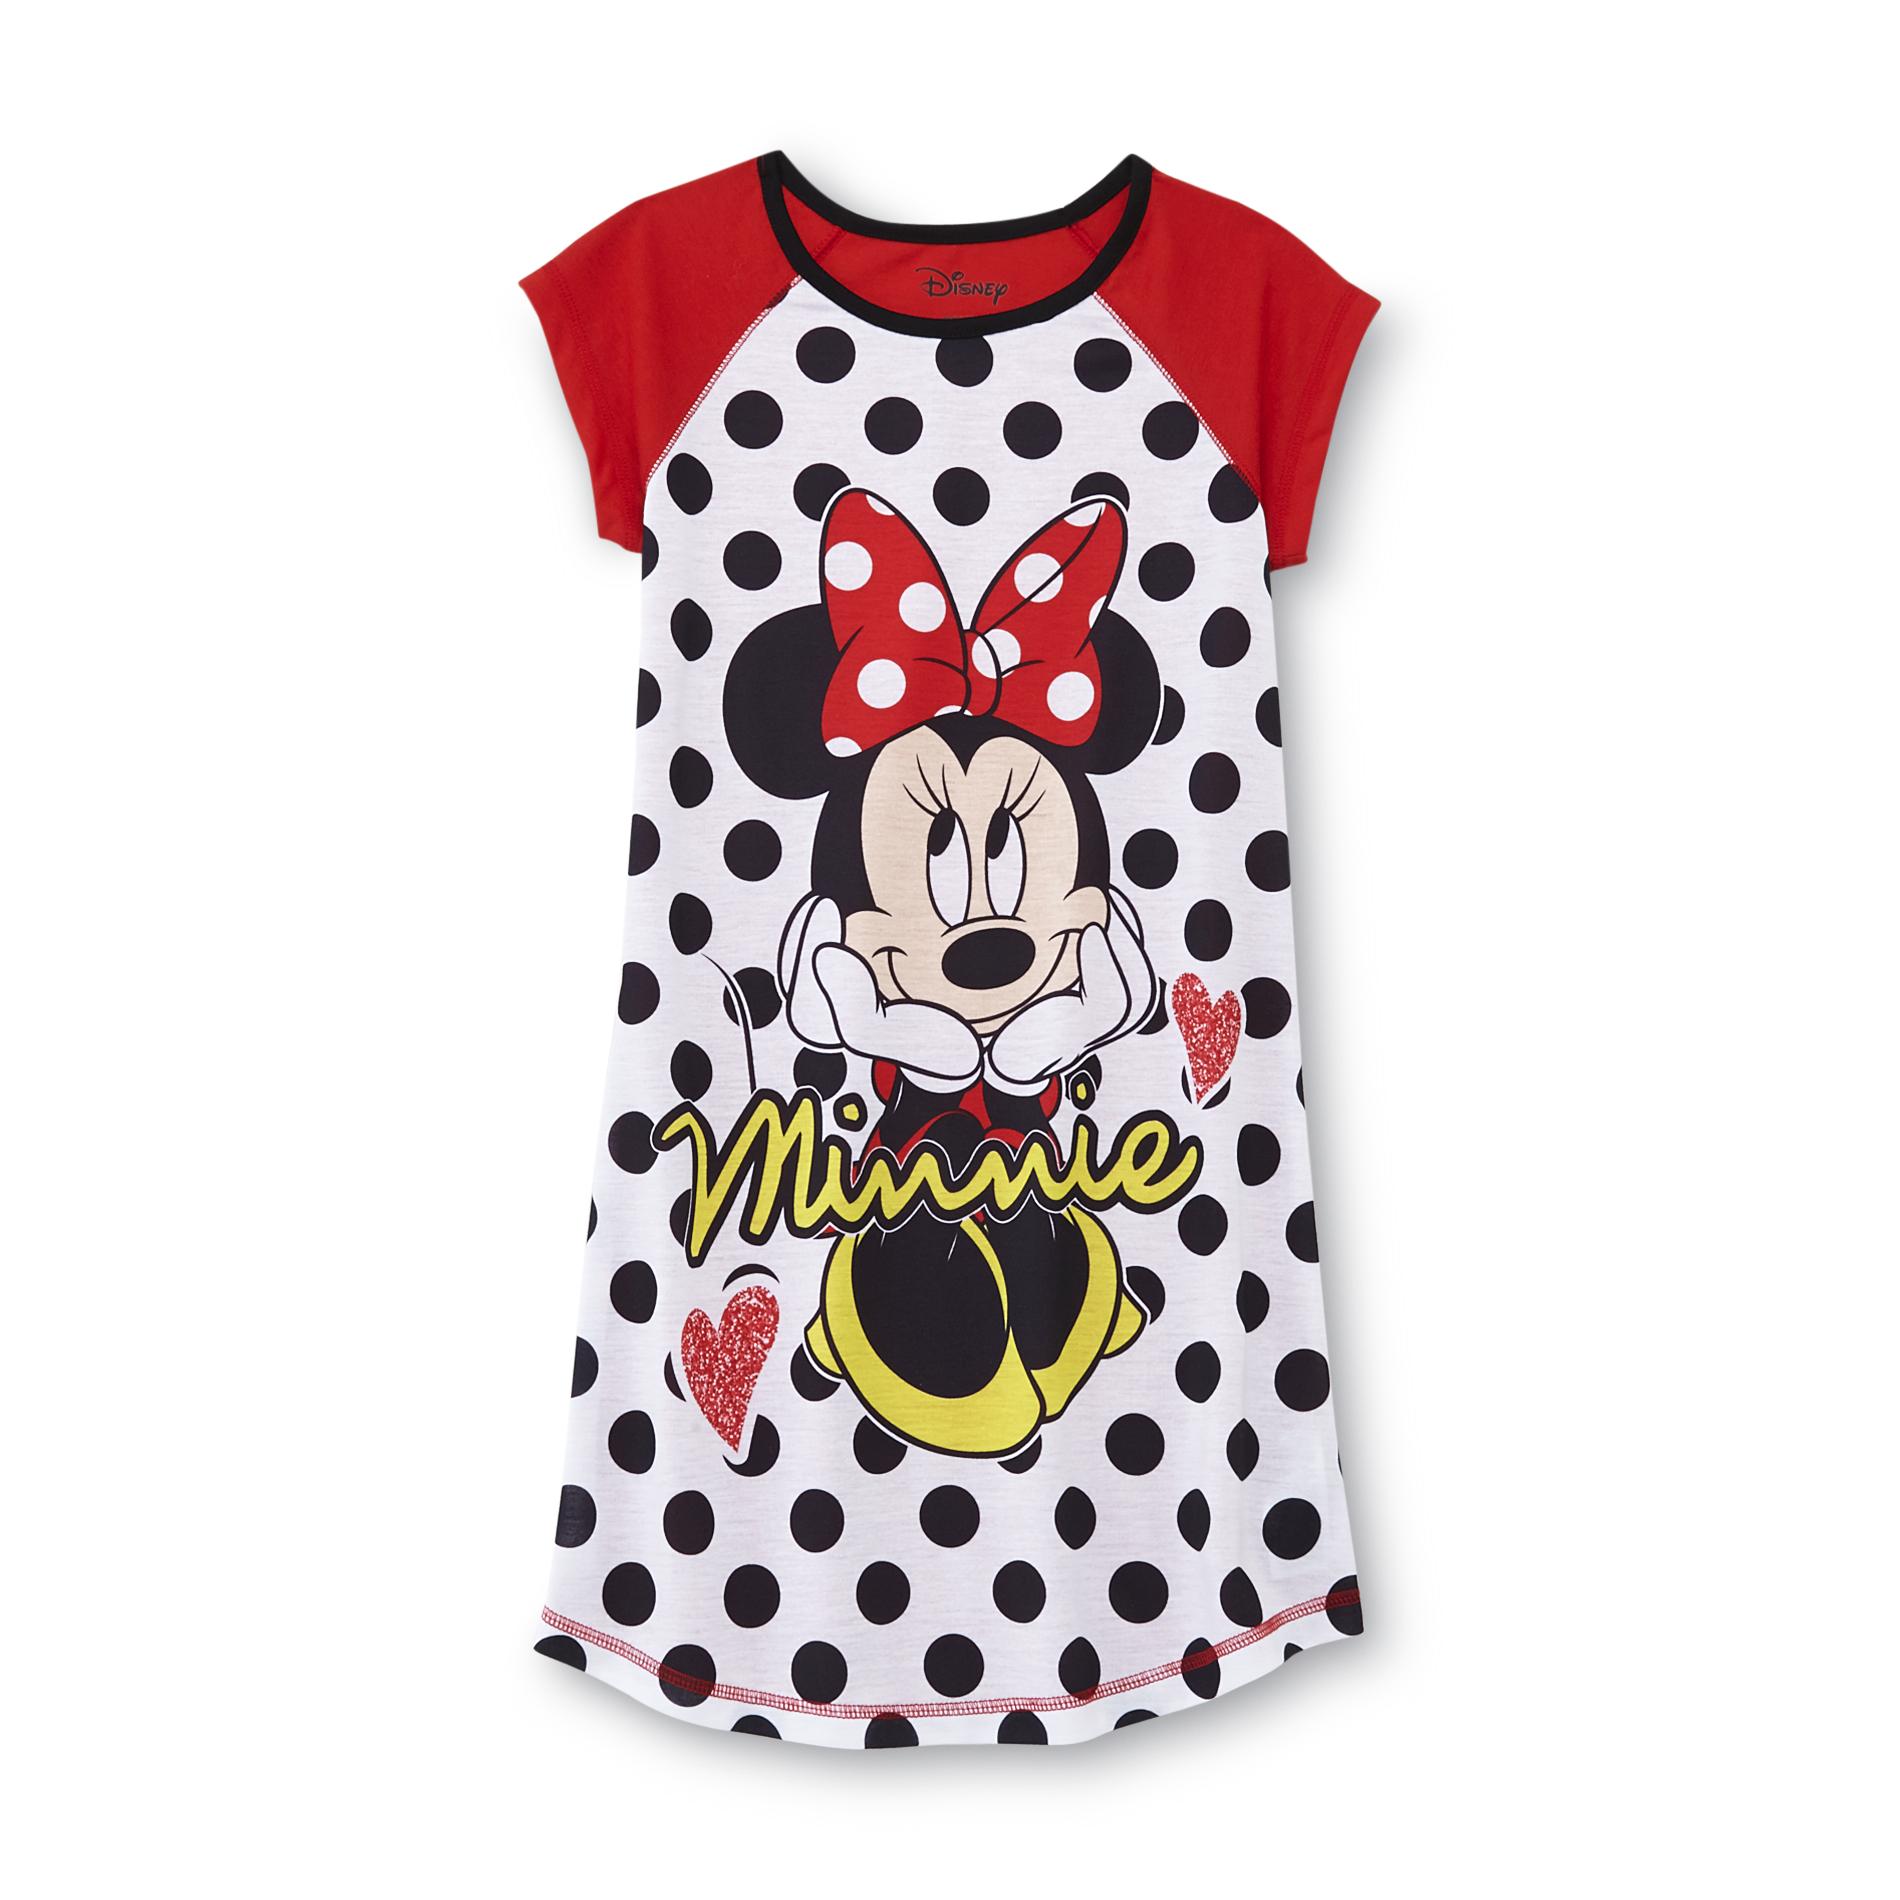 Disney Minnie Mouse Girl's Nightgown - Polka dots